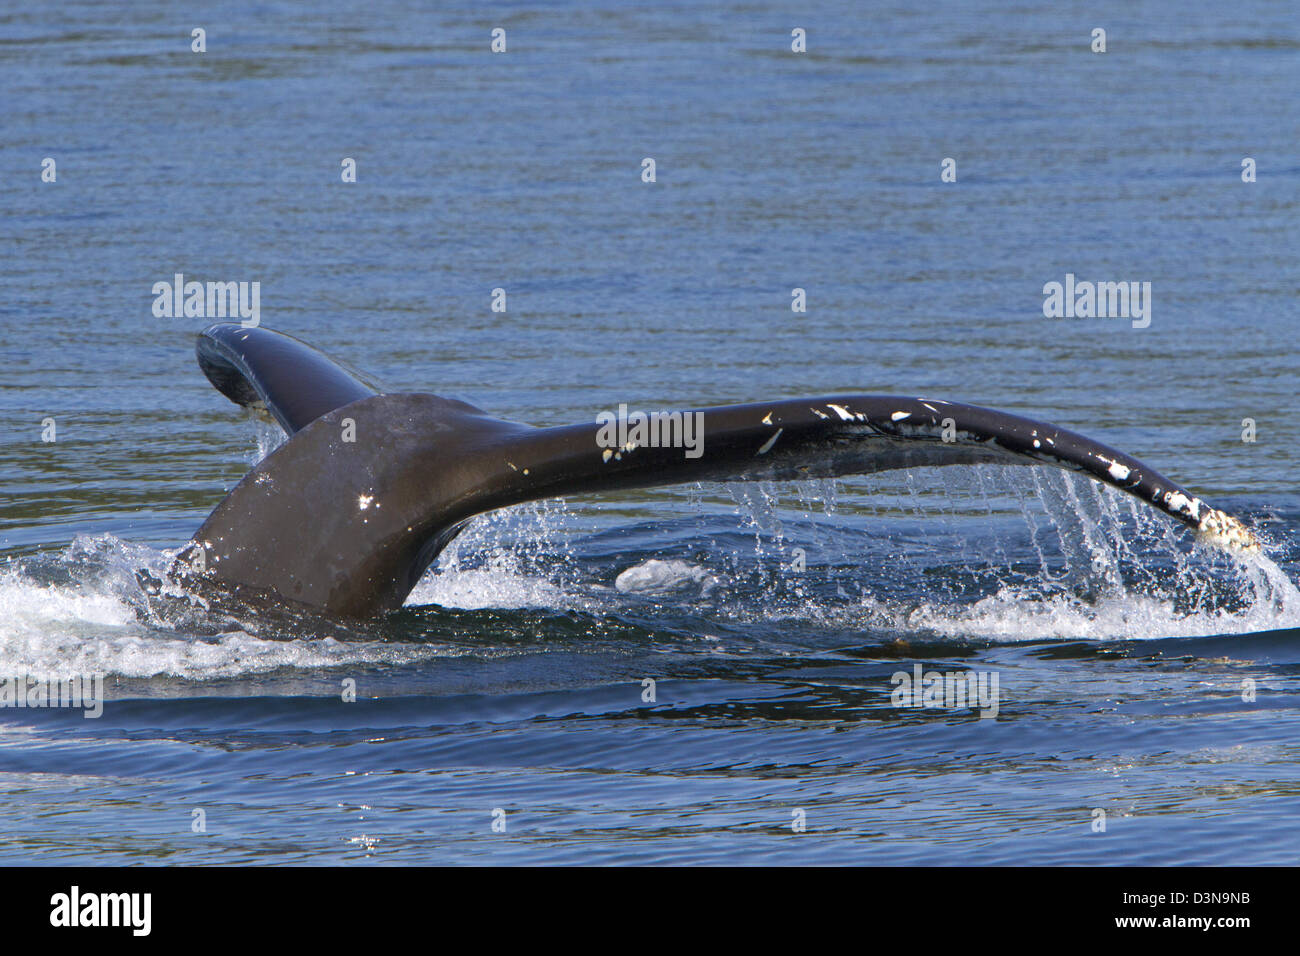 Fluked tail of a Humpback Whale (Megaptera novaeangliae) in the Johnstone Strait near Telegraph Cove, BC, Canada in August Stock Photo